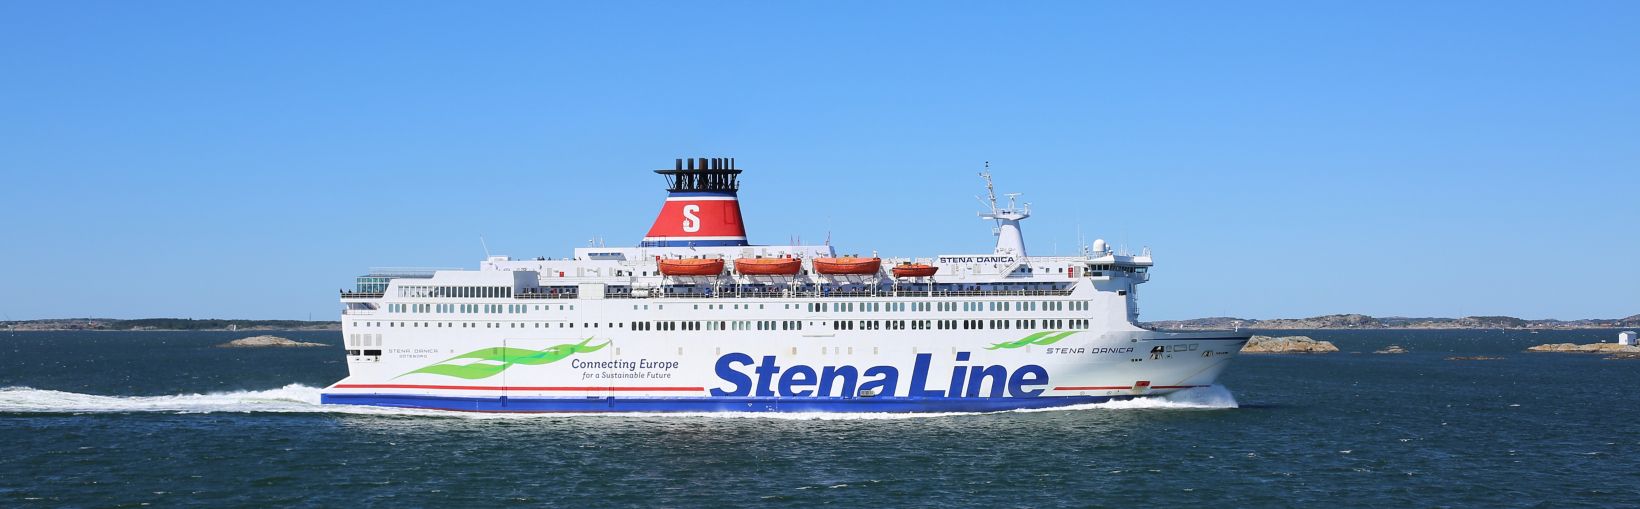 View of starboard side of Stena Danica at sea on a cloudless day